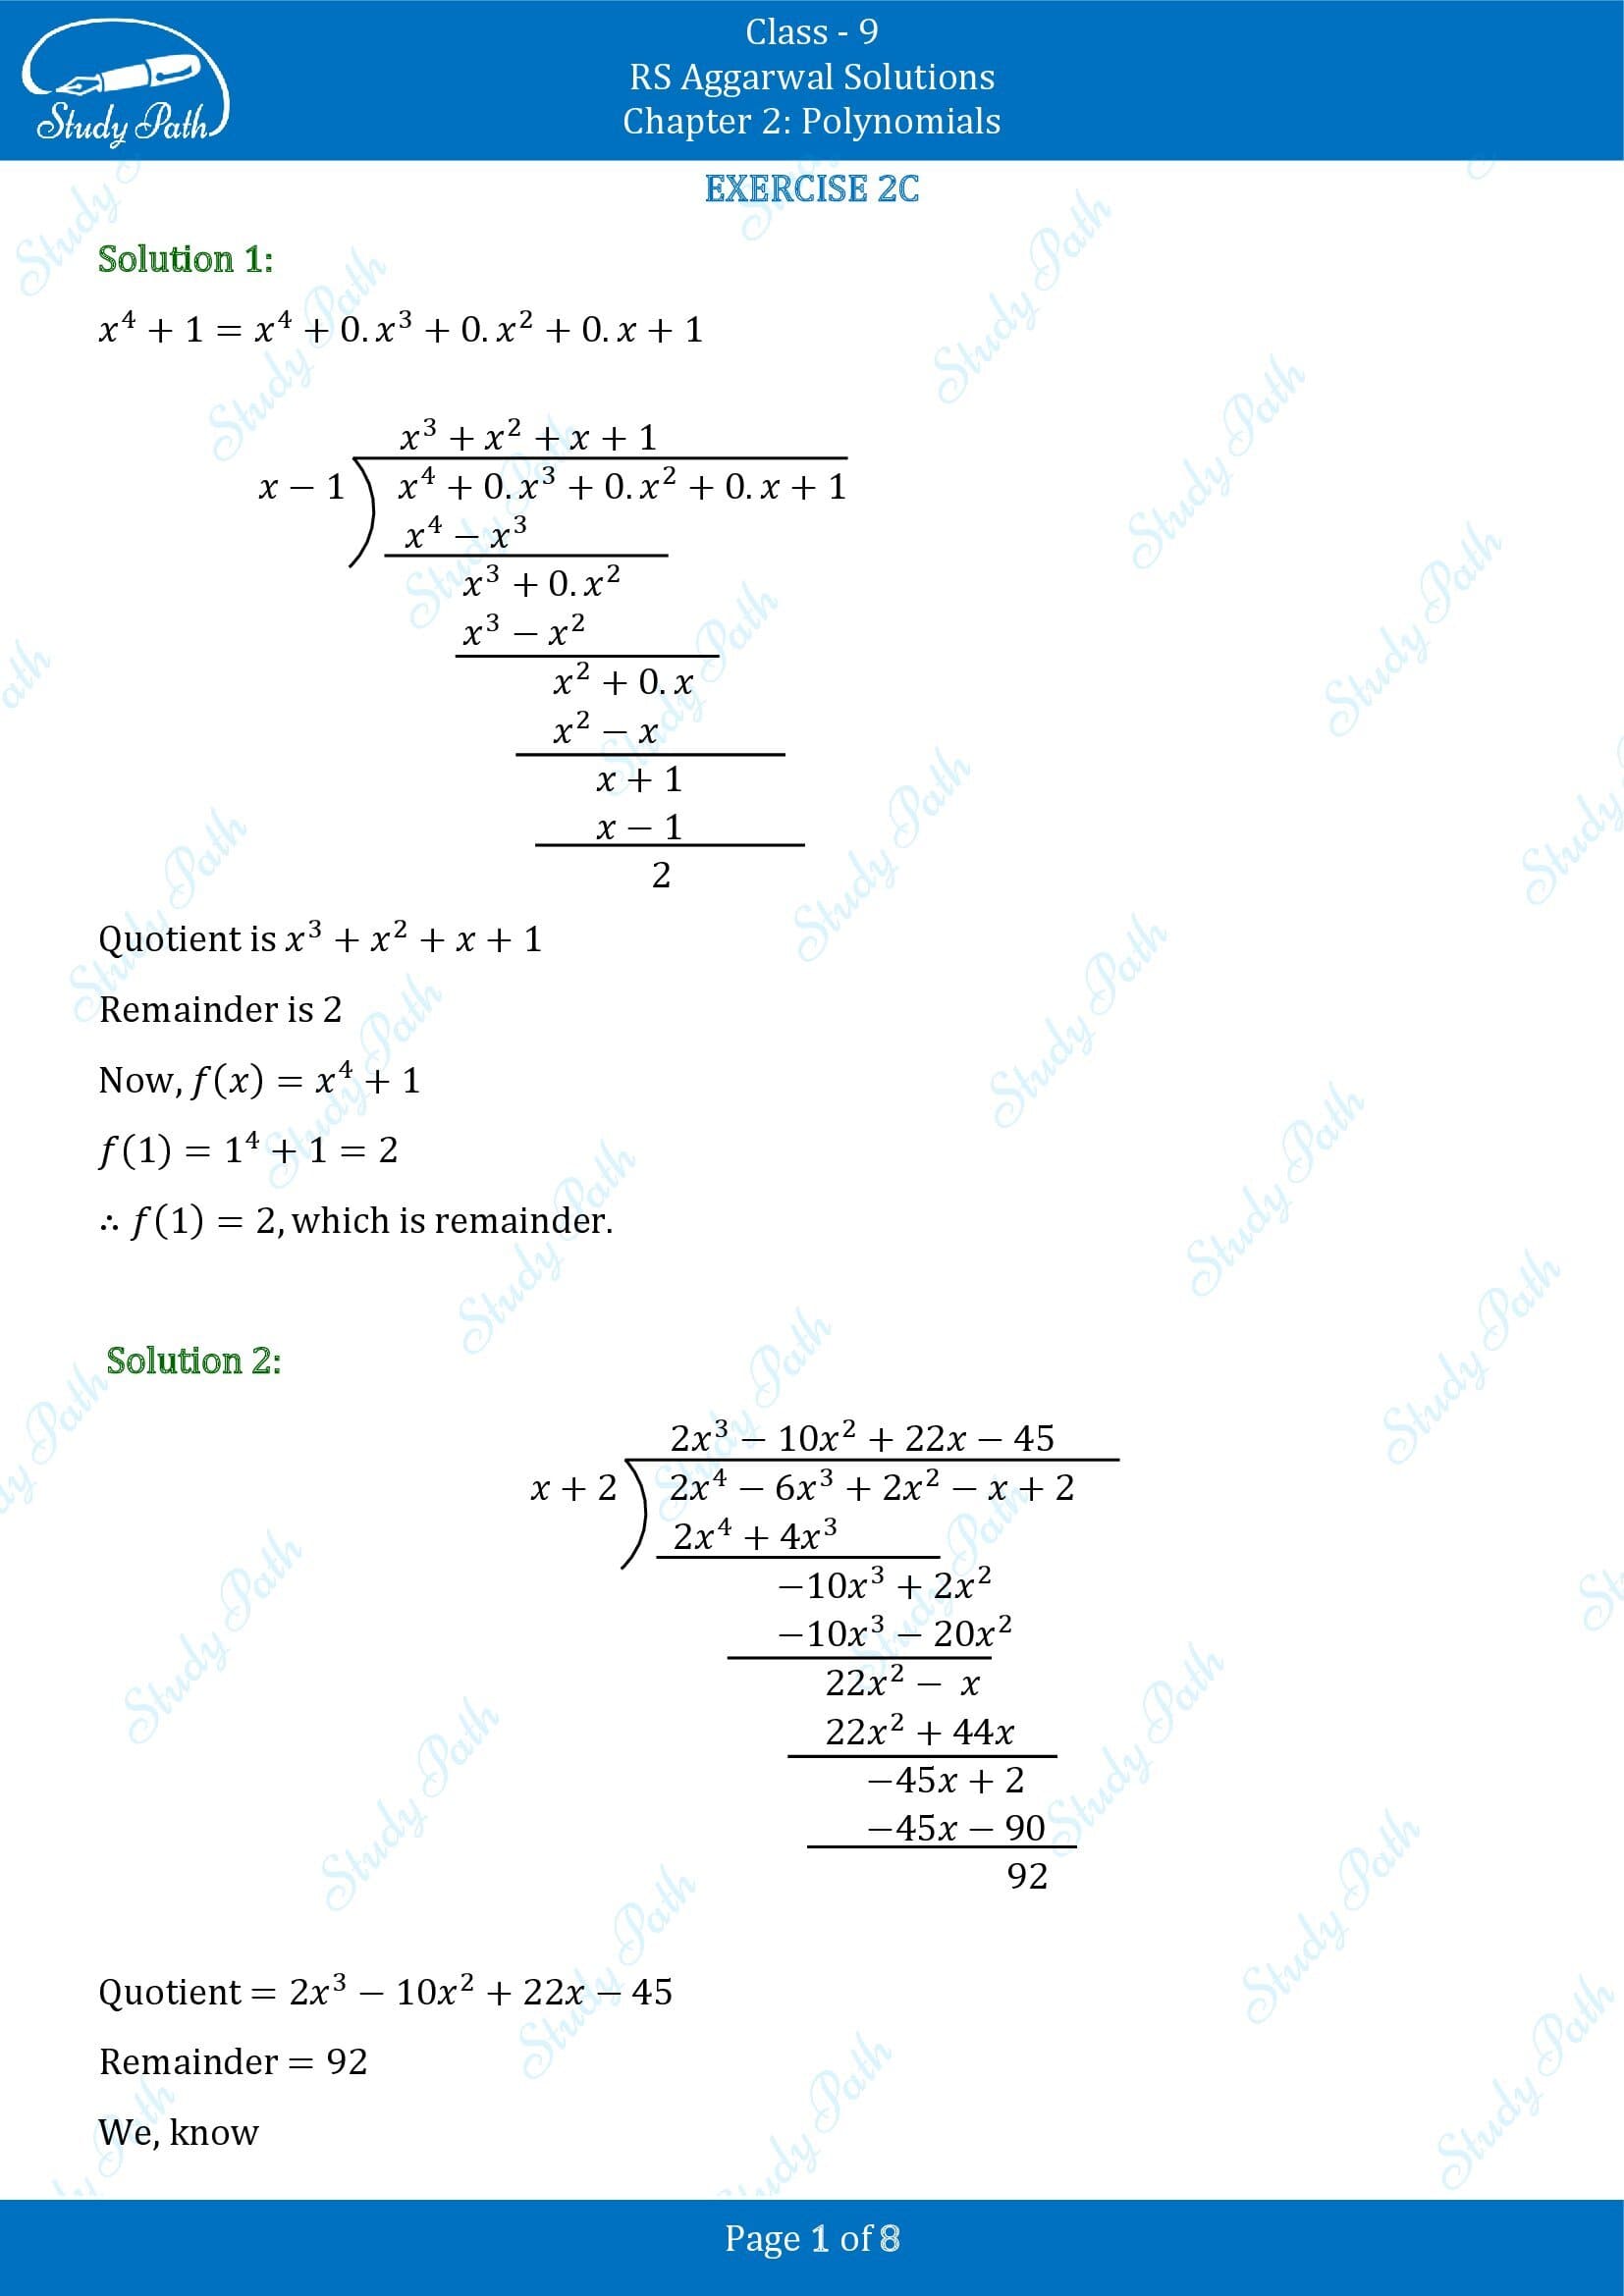 RS Aggarwal Solutions Class 9 Chapter 2 Polynomials Exercise 2C 00001